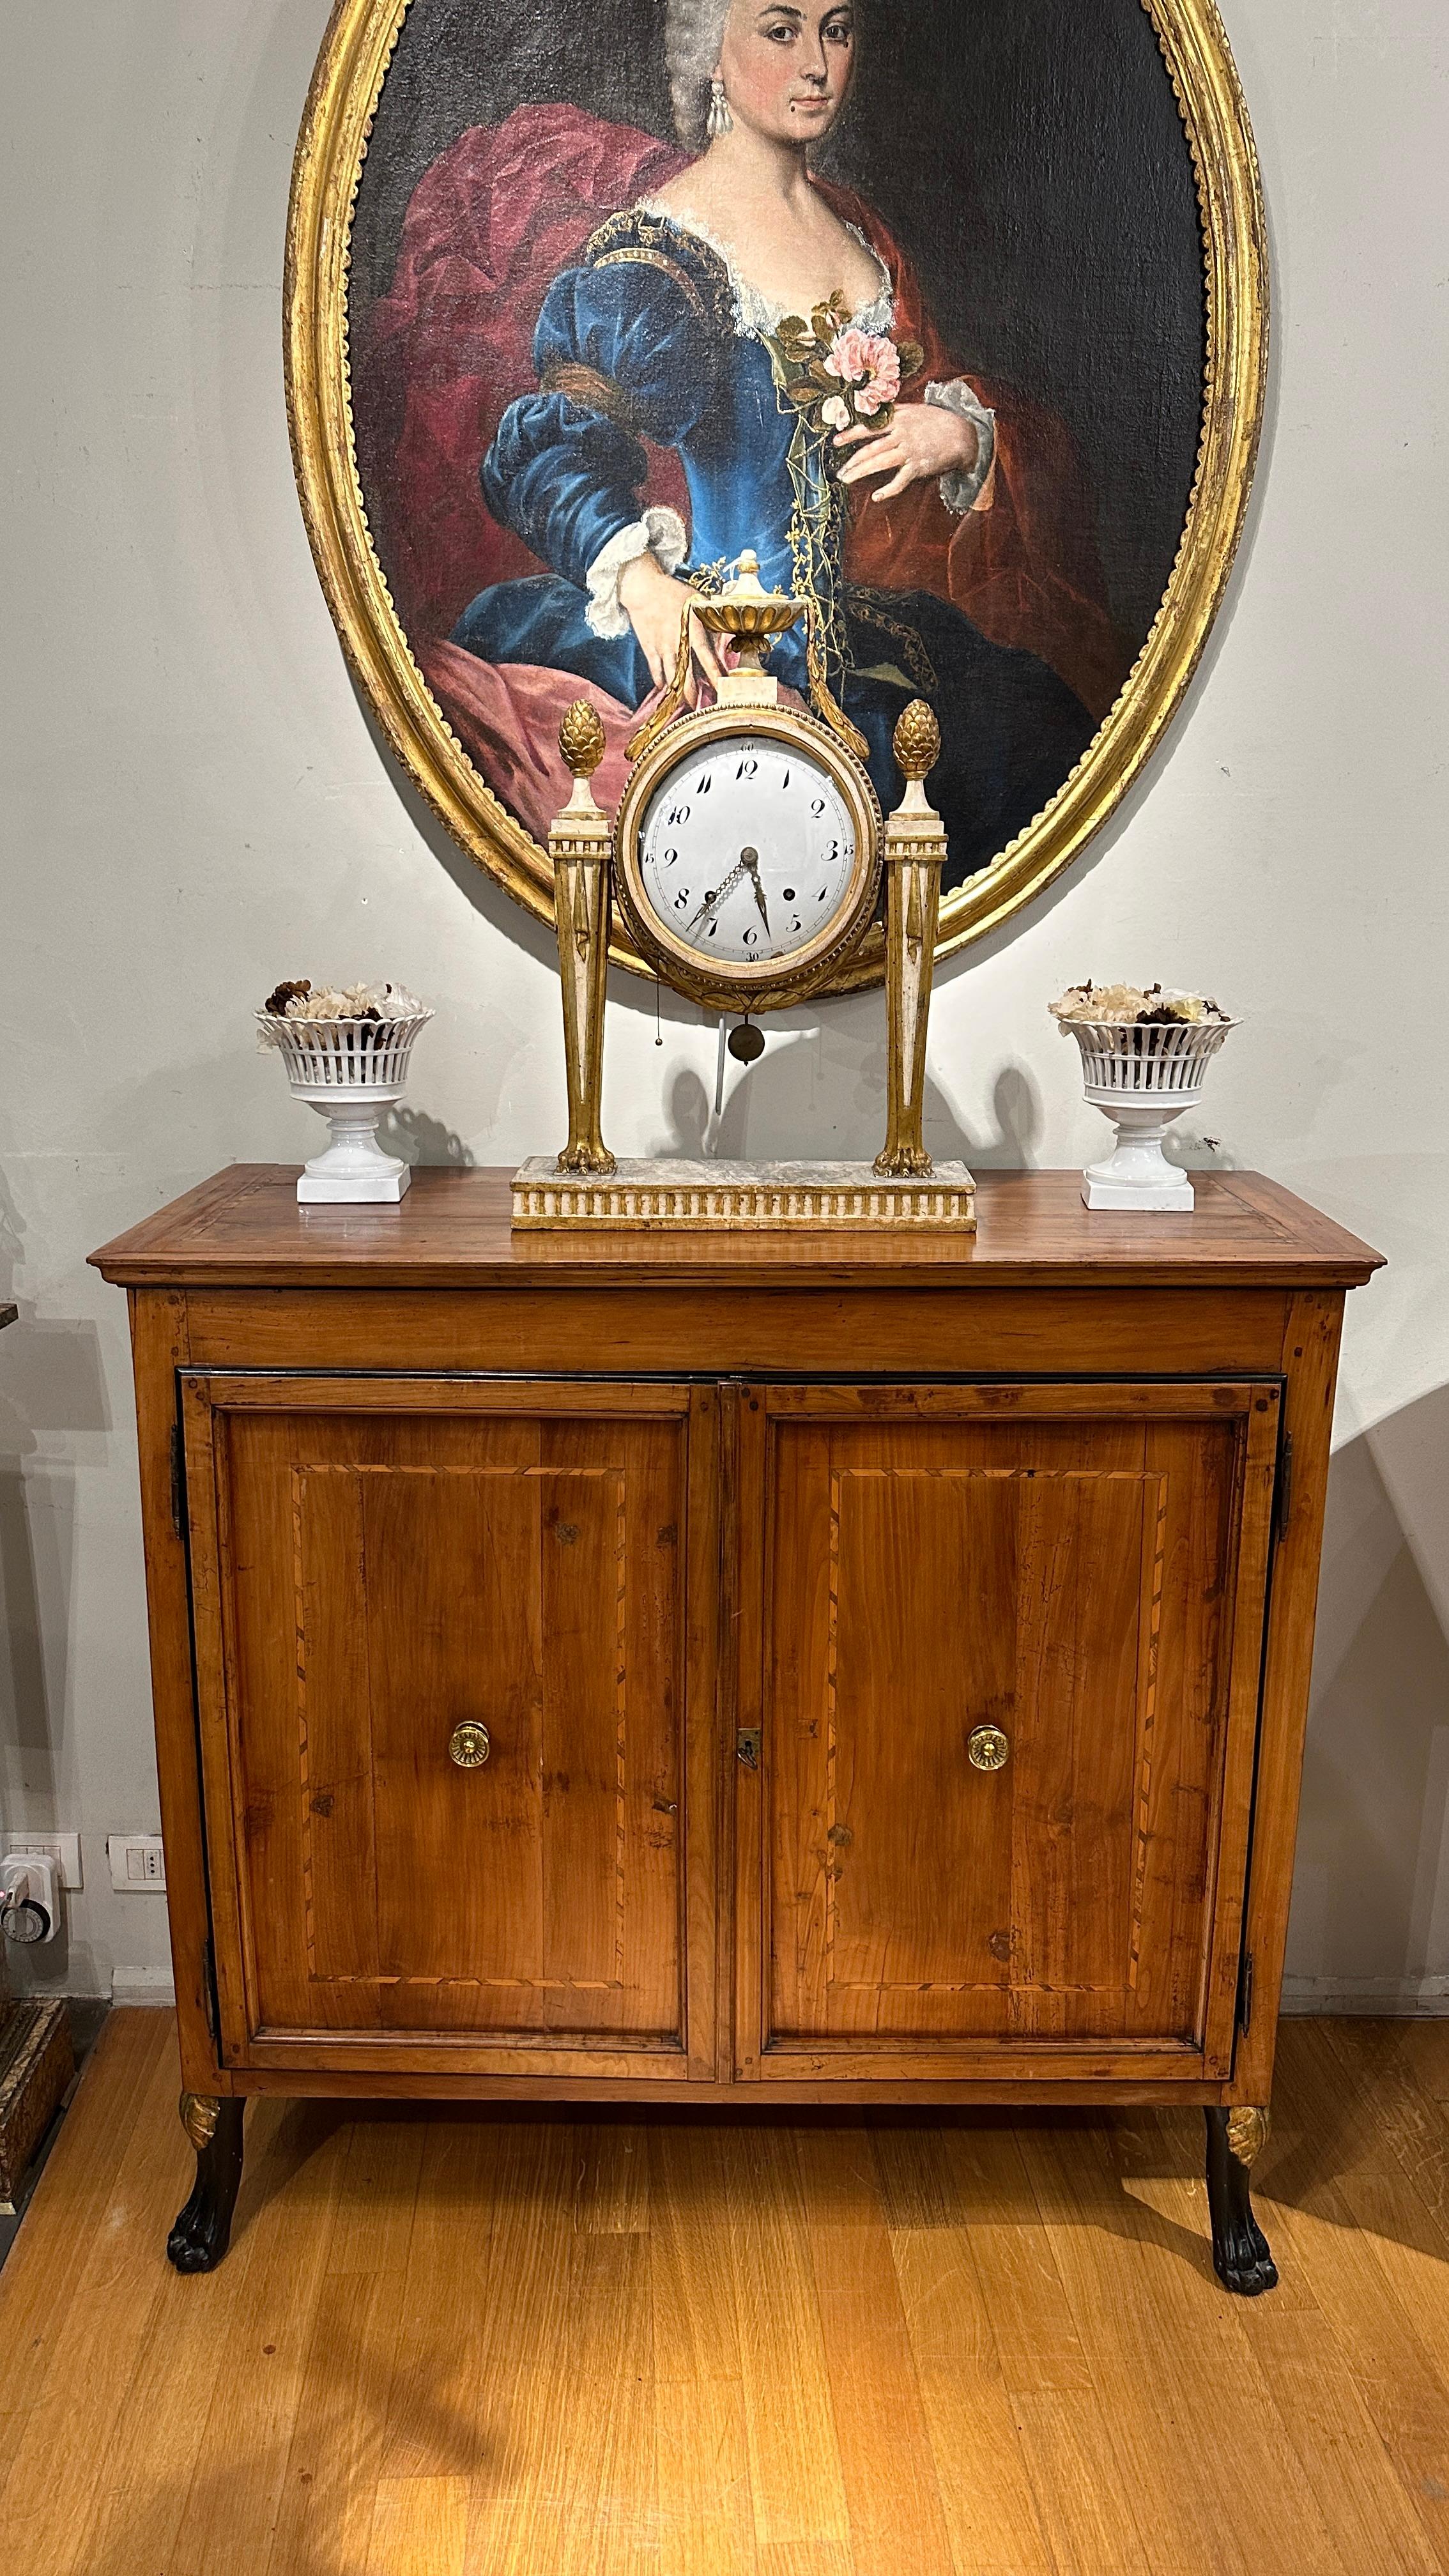 Italian EARLY 19th CENTURY LUCHESE EMPIRE SIDEBOARD